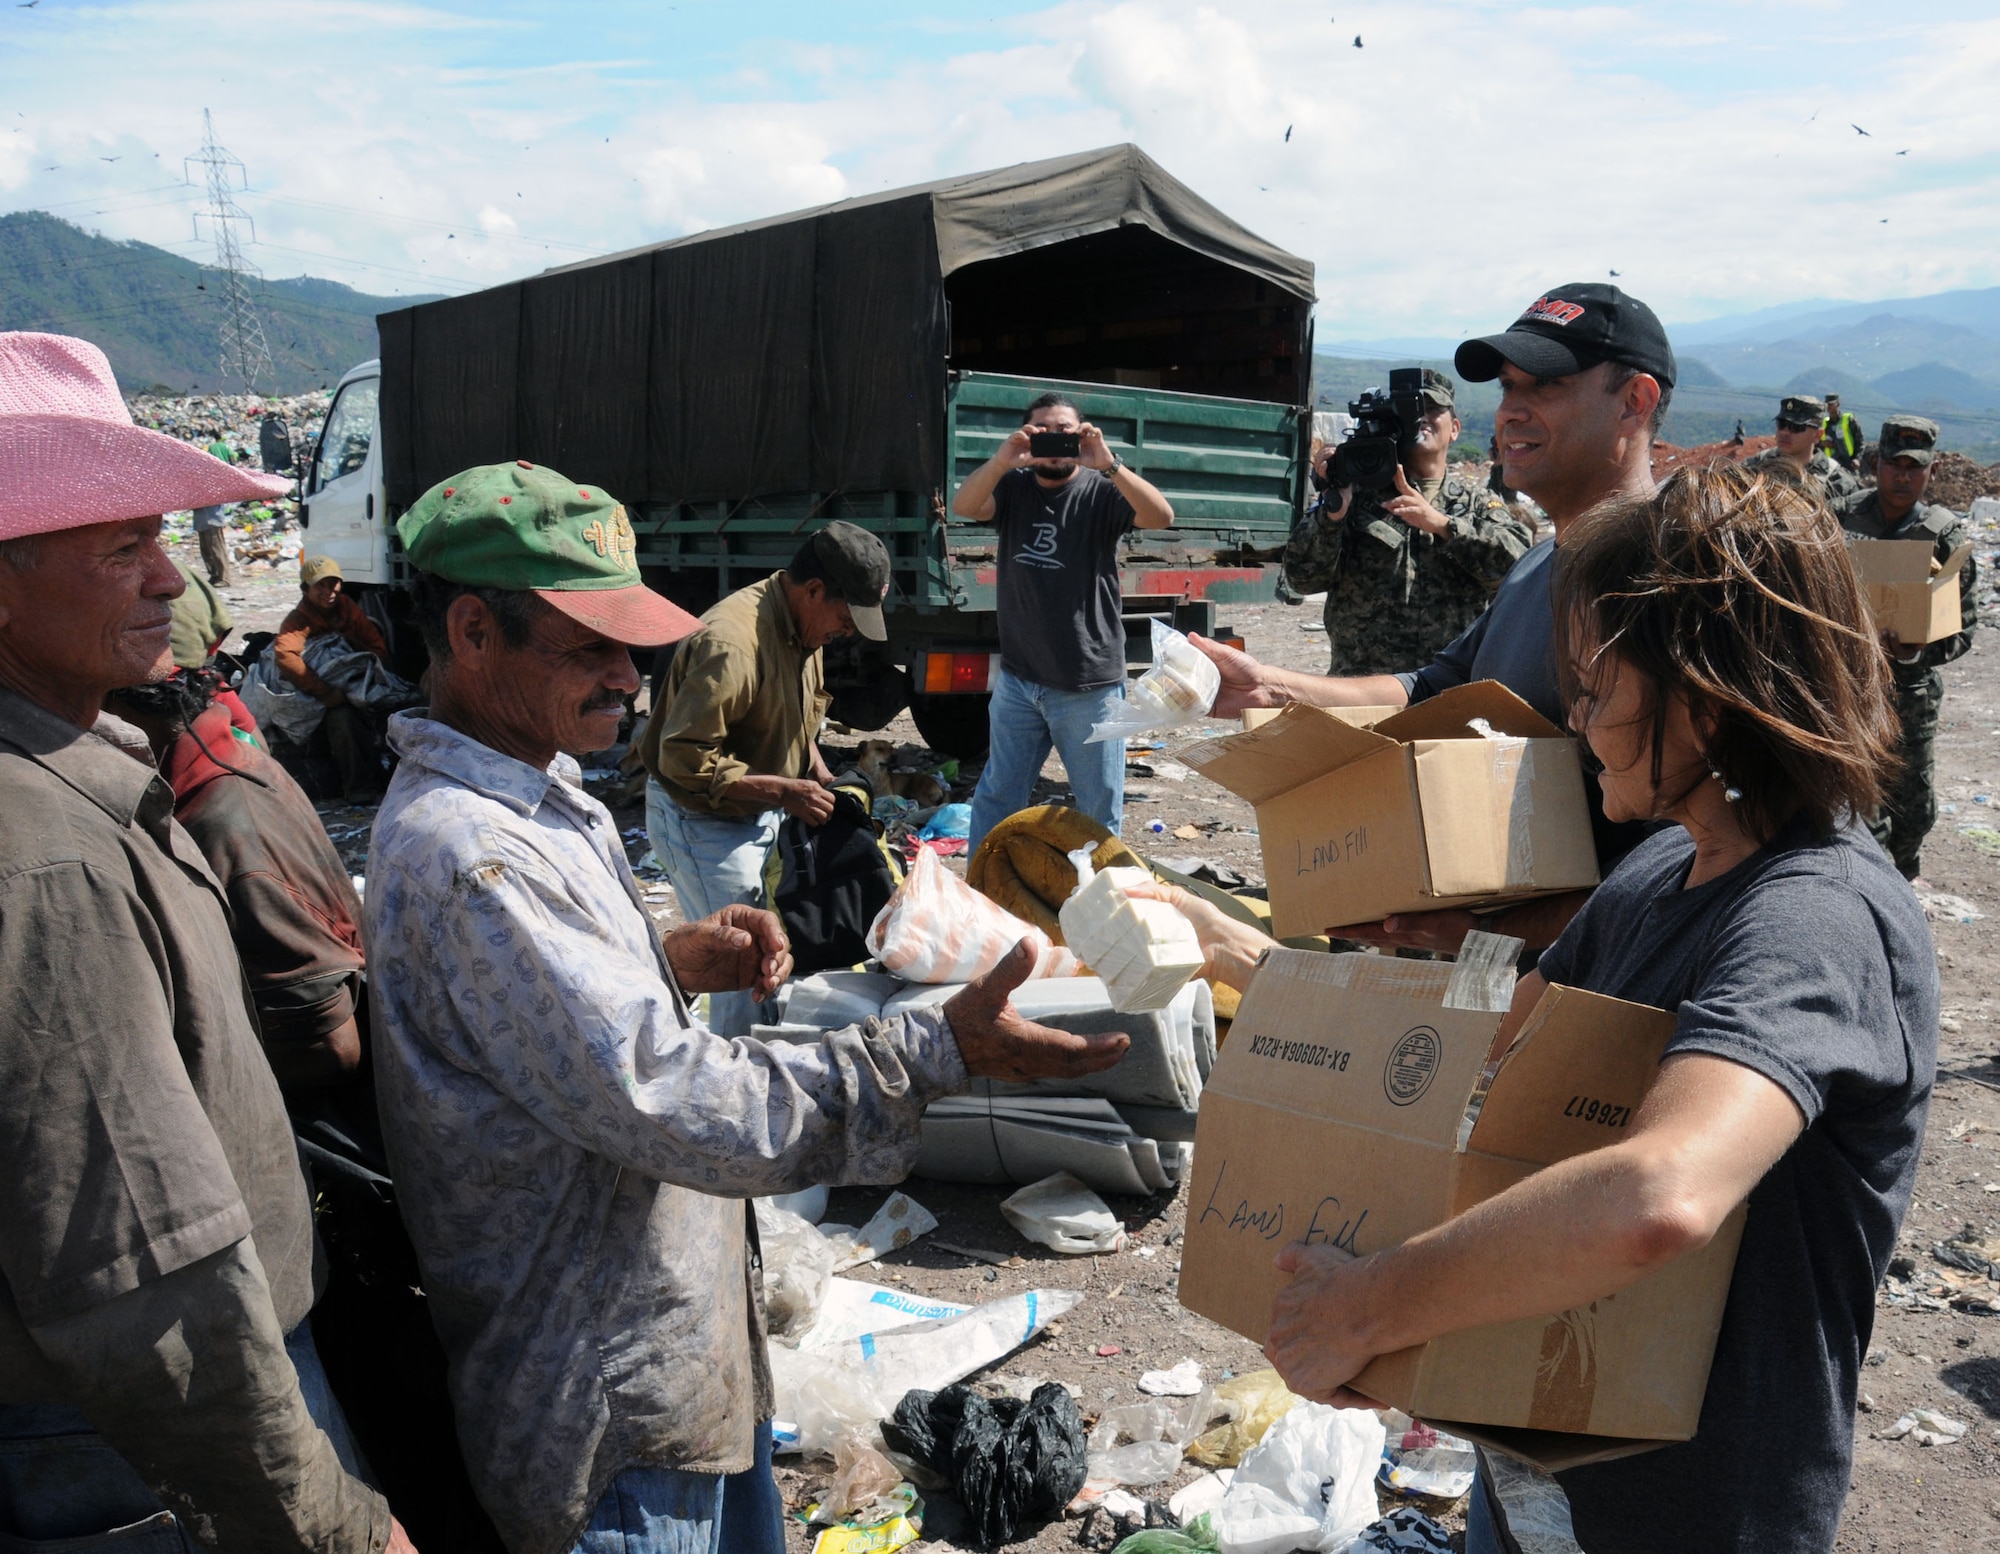 U. S. Army Lt. Col Frank Melgarejo, Joint Task Force-Bravo operations officer and Sandi Burges, Bridge Ministries founder, hand out soap kits to people at the Comayaguela Landfill.  Joint Task Force-Bravo, non-government organizations Clean the World, Bridge Ministries and Kick for Nick Foundation, the Honduran 21st Military Police Battalion and the Honduran National Police formed a partnership to distribute soap kits, backpacks with school supplies, tooth brushes and tooth paste, soccer balls and uniforms to students at eight Tegucigalpa, Honduras schools in a two-day event, May 20-21, 2014.  The group handed out over 4,200 soap kits, 600 backpacks, 150 tooth brushes and tooth paste, and 50 soccer balls.  (Photo by U. S. Air National Guard Capt. Steven Stubbs).